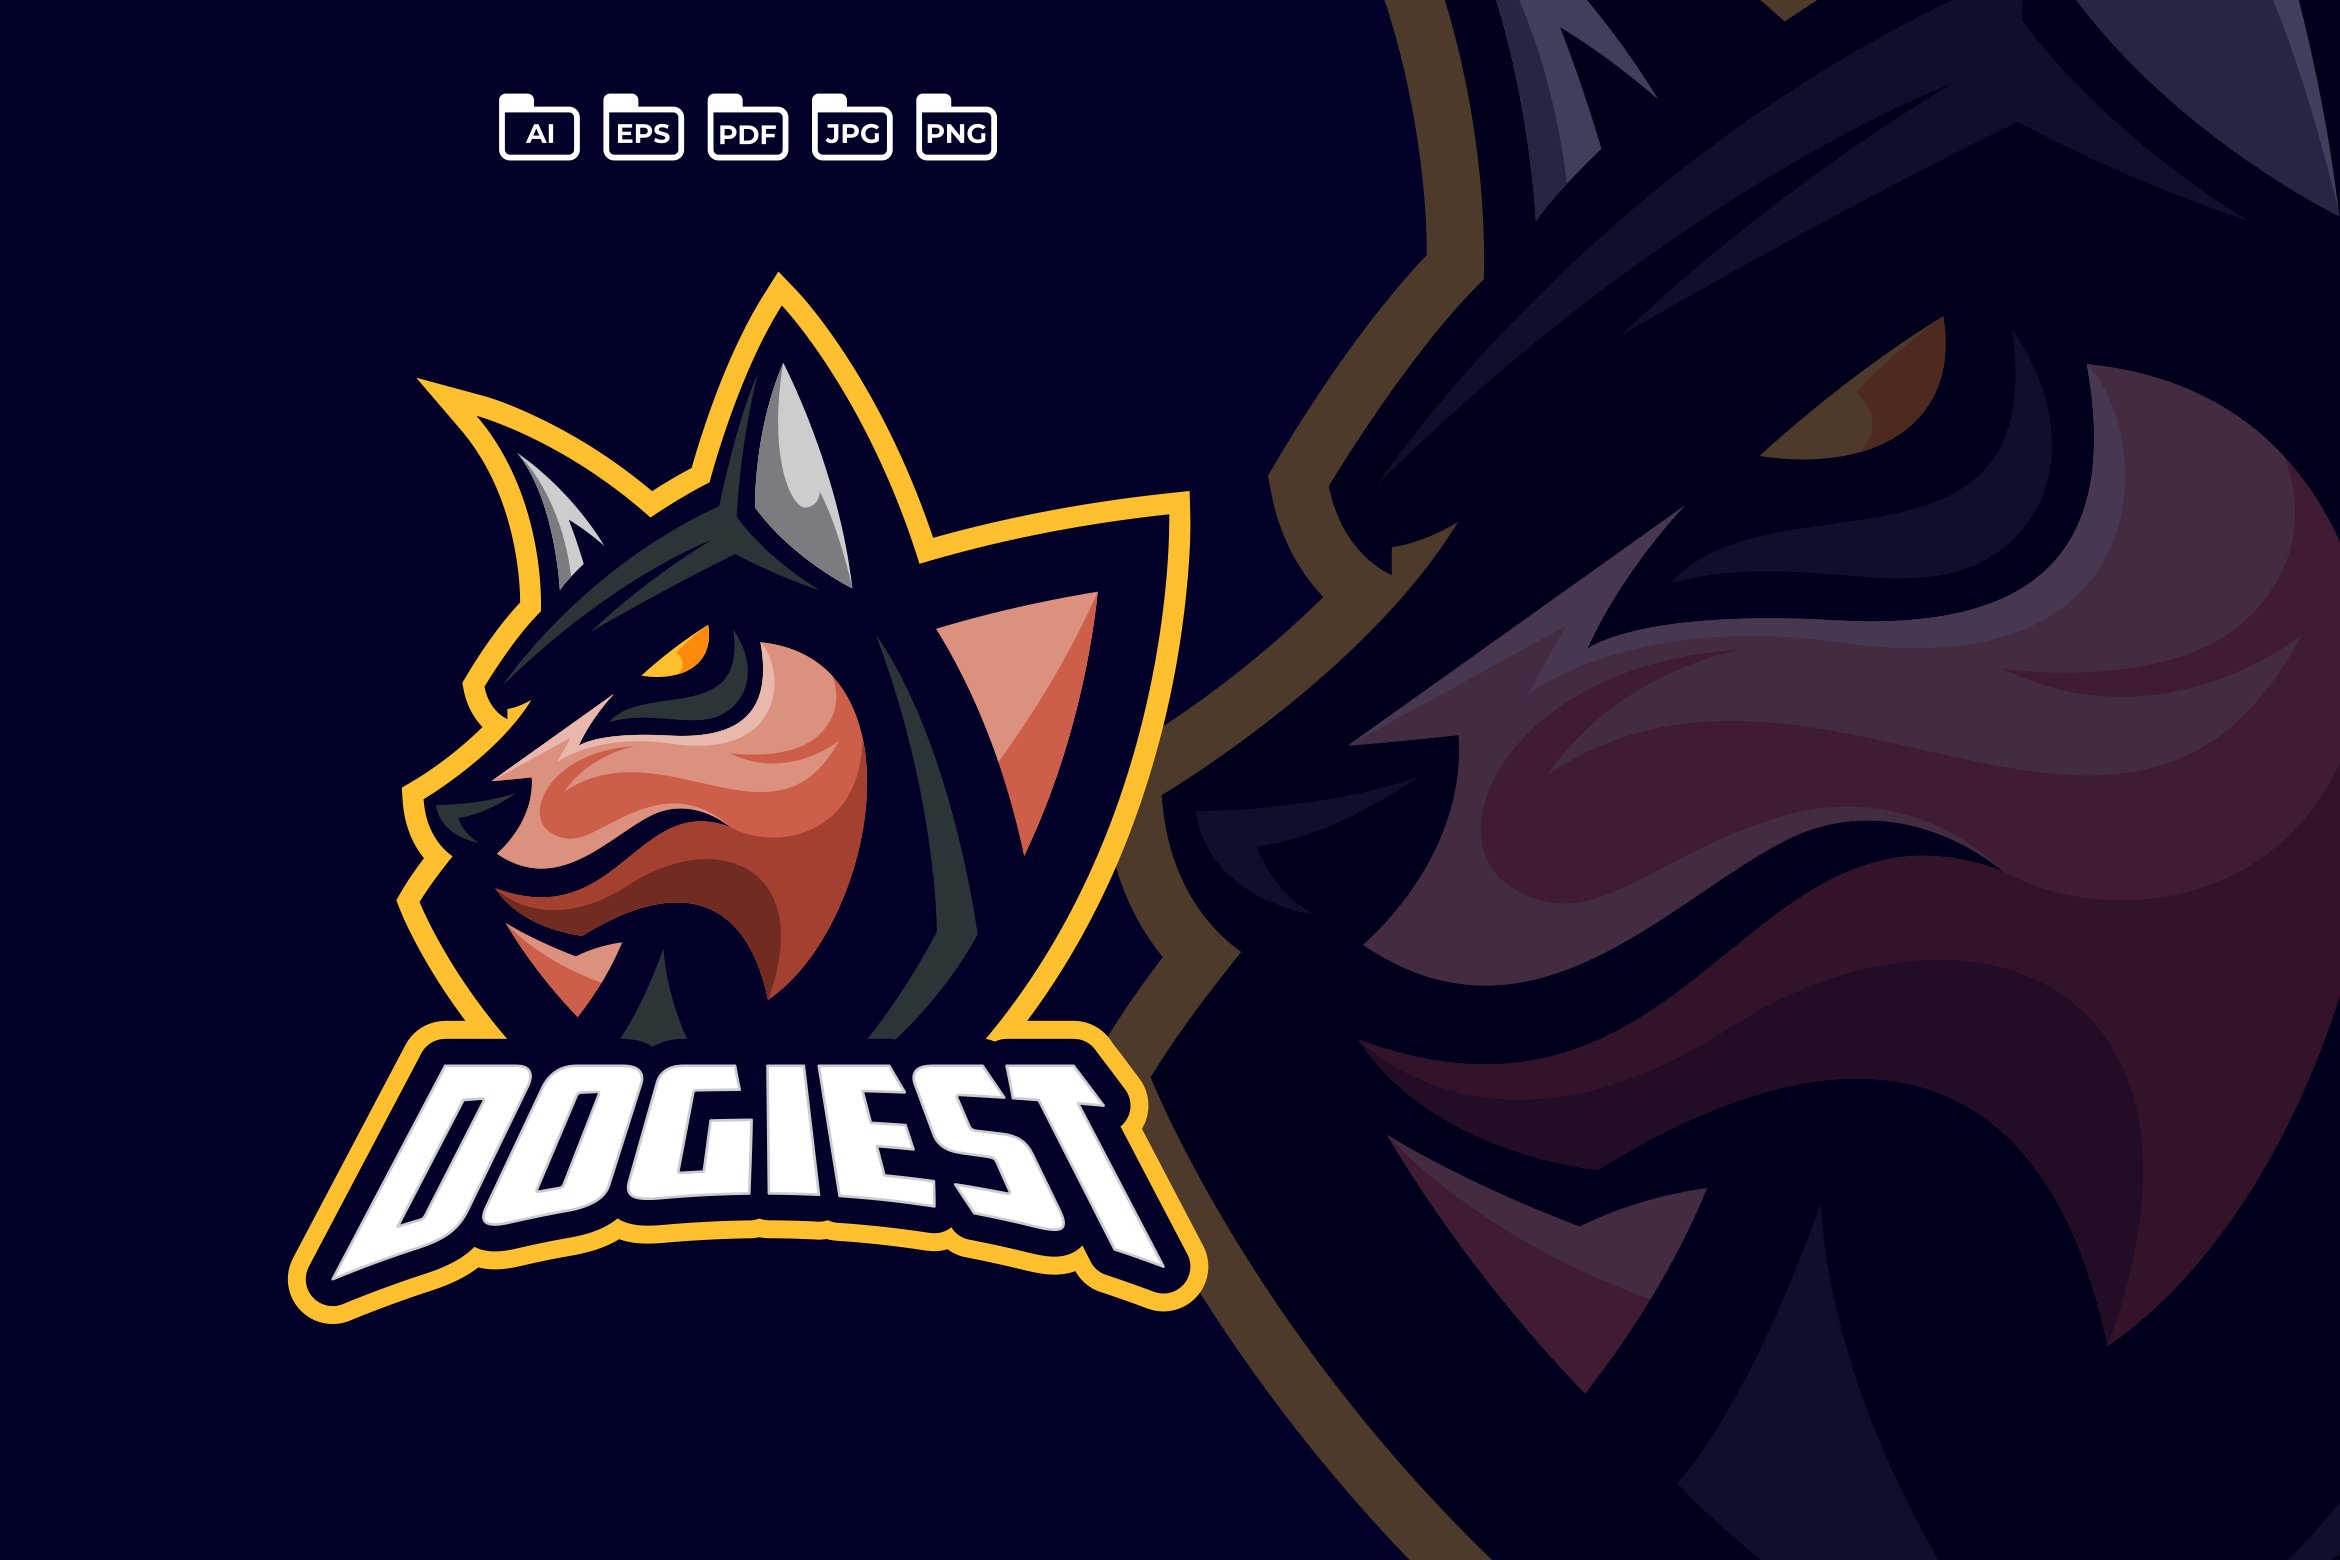 DOG logo Template cover image.